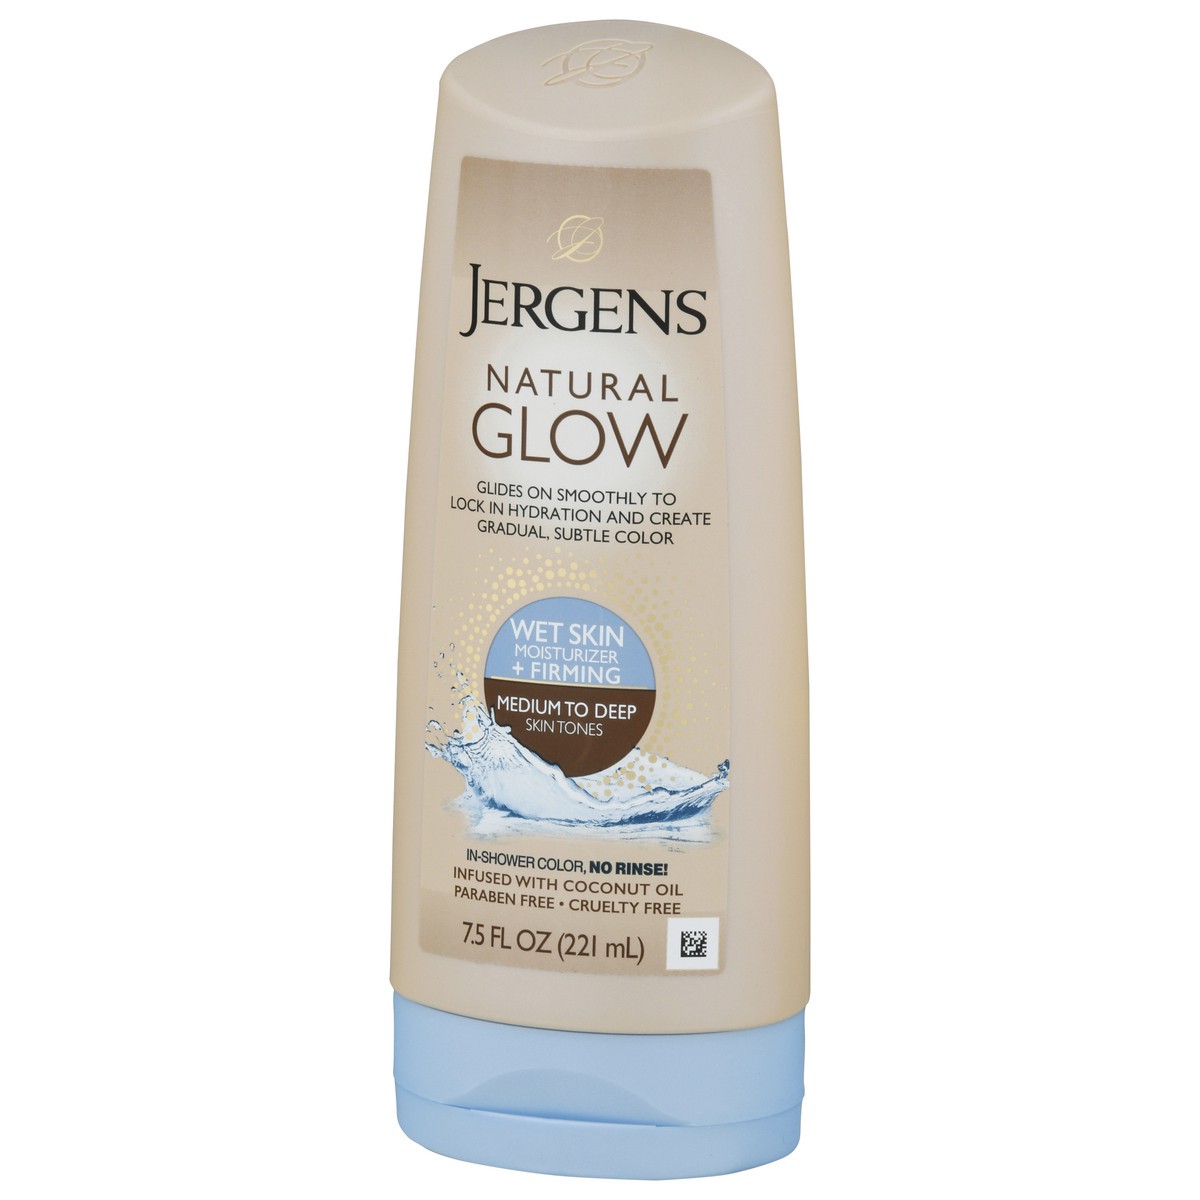 slide 4 of 9, Jergens Natural Glow +FIRMING In-shower Sunless Tanning Lotion, Self Tanner for Medium to Deep Skin Tone, Anti Cellulite Firming Body Lotion, for Gradual and Natural-Looking Fake Tan, 7.5 Ounce, 7.50 fl oz